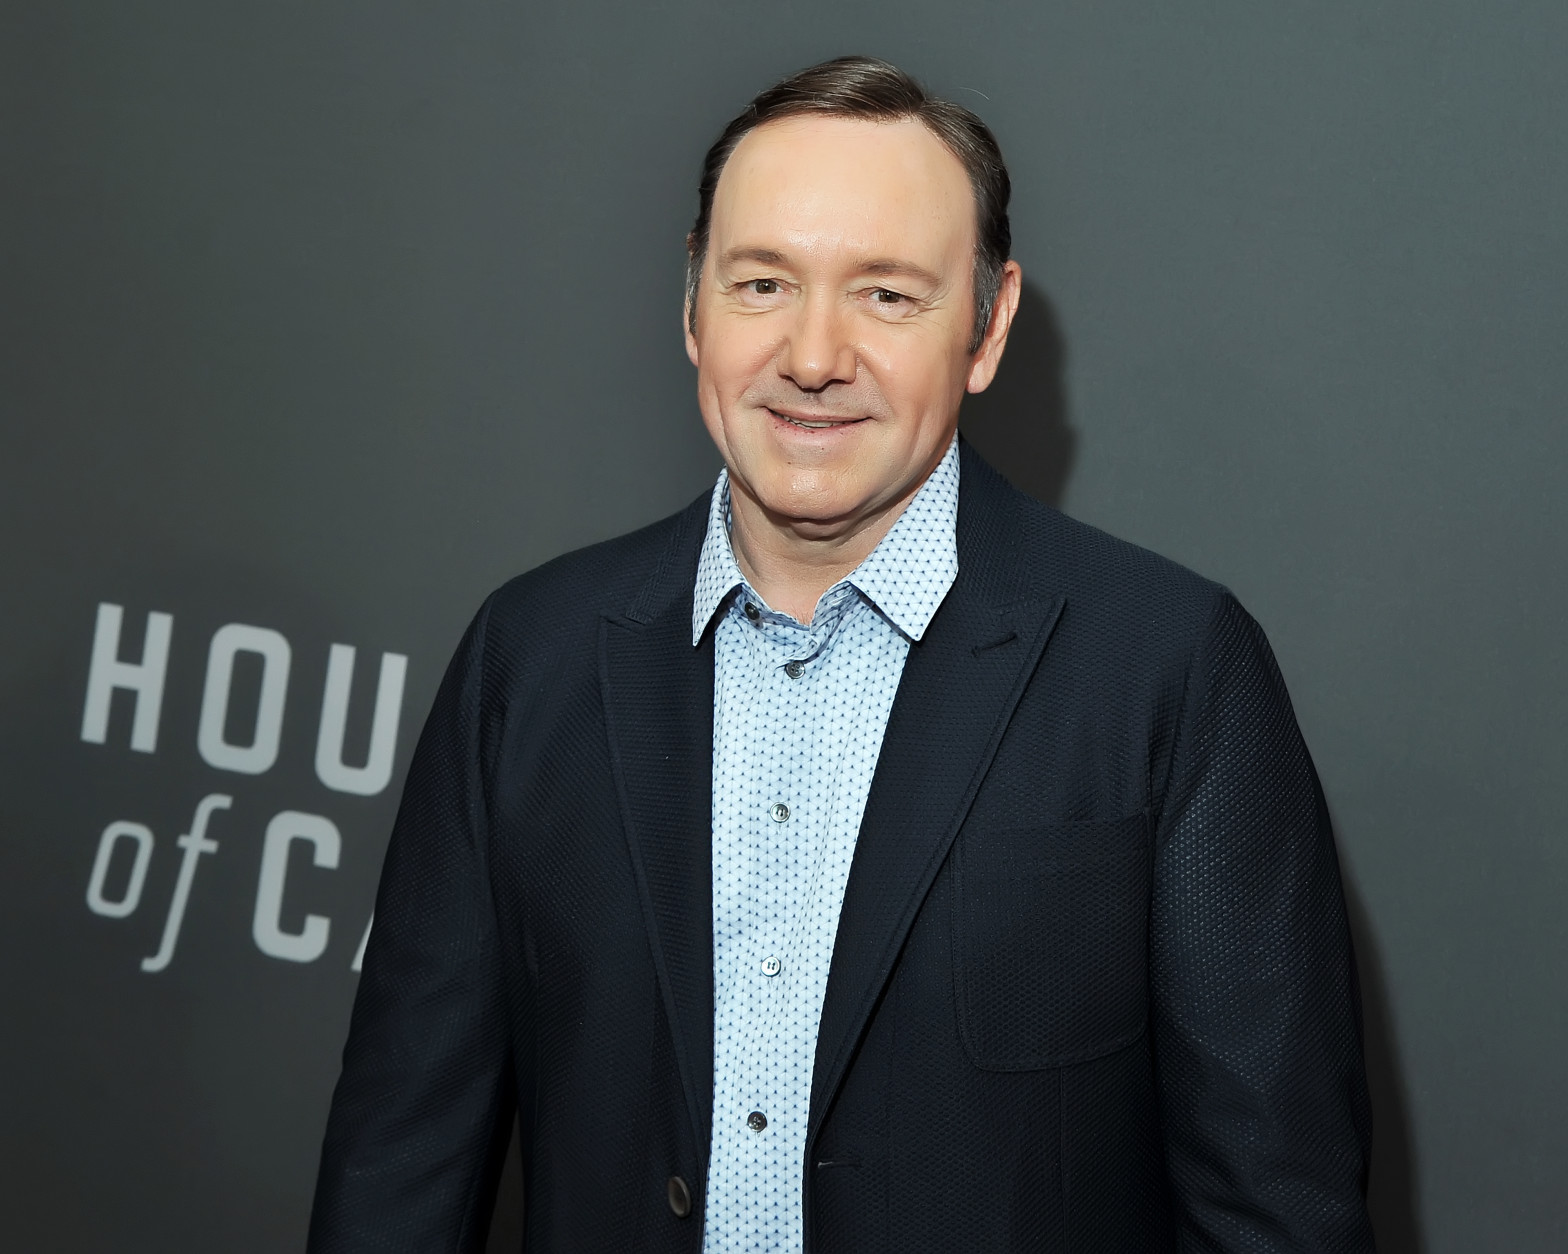 Kevin Spacey pictured at the “House of Cards” Season 4 premiere screening on Feb. 22, 2016. (Courtesy Shannon Finney, www.shannonfinneyphotography.com)